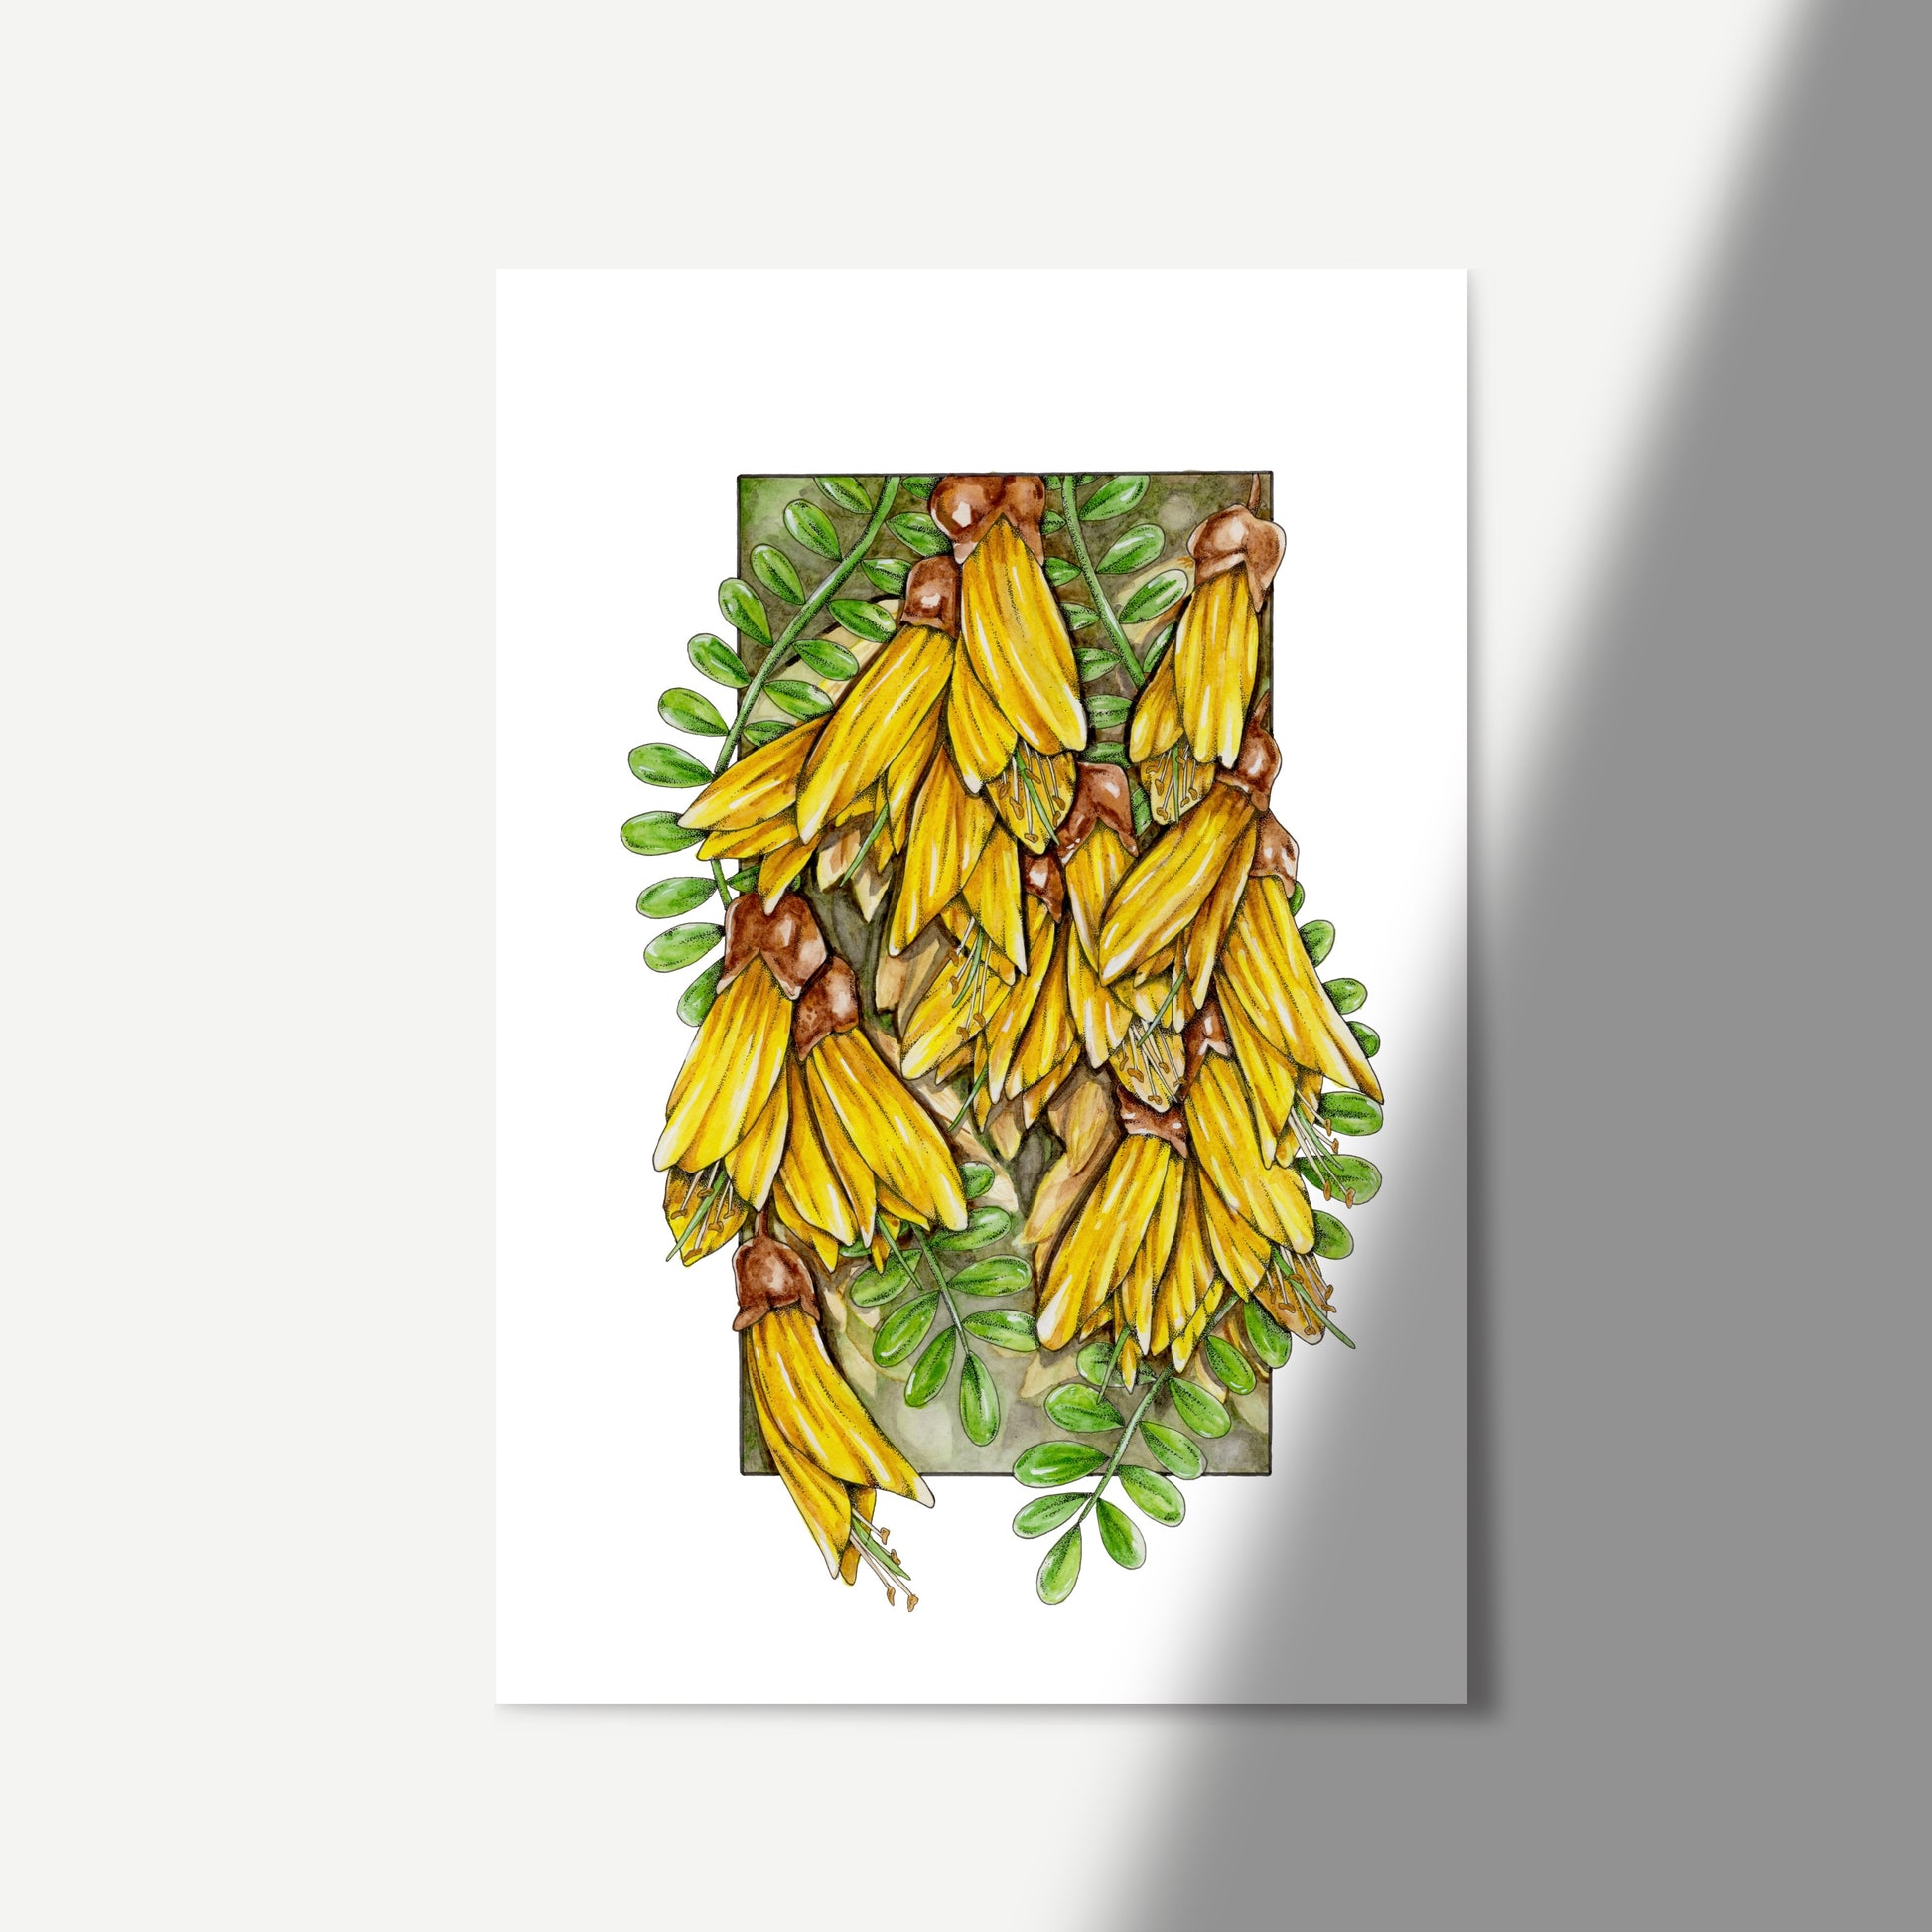 Artwork featuring yellow kowhai flowers cascading out of a frame amongst the green leaves.